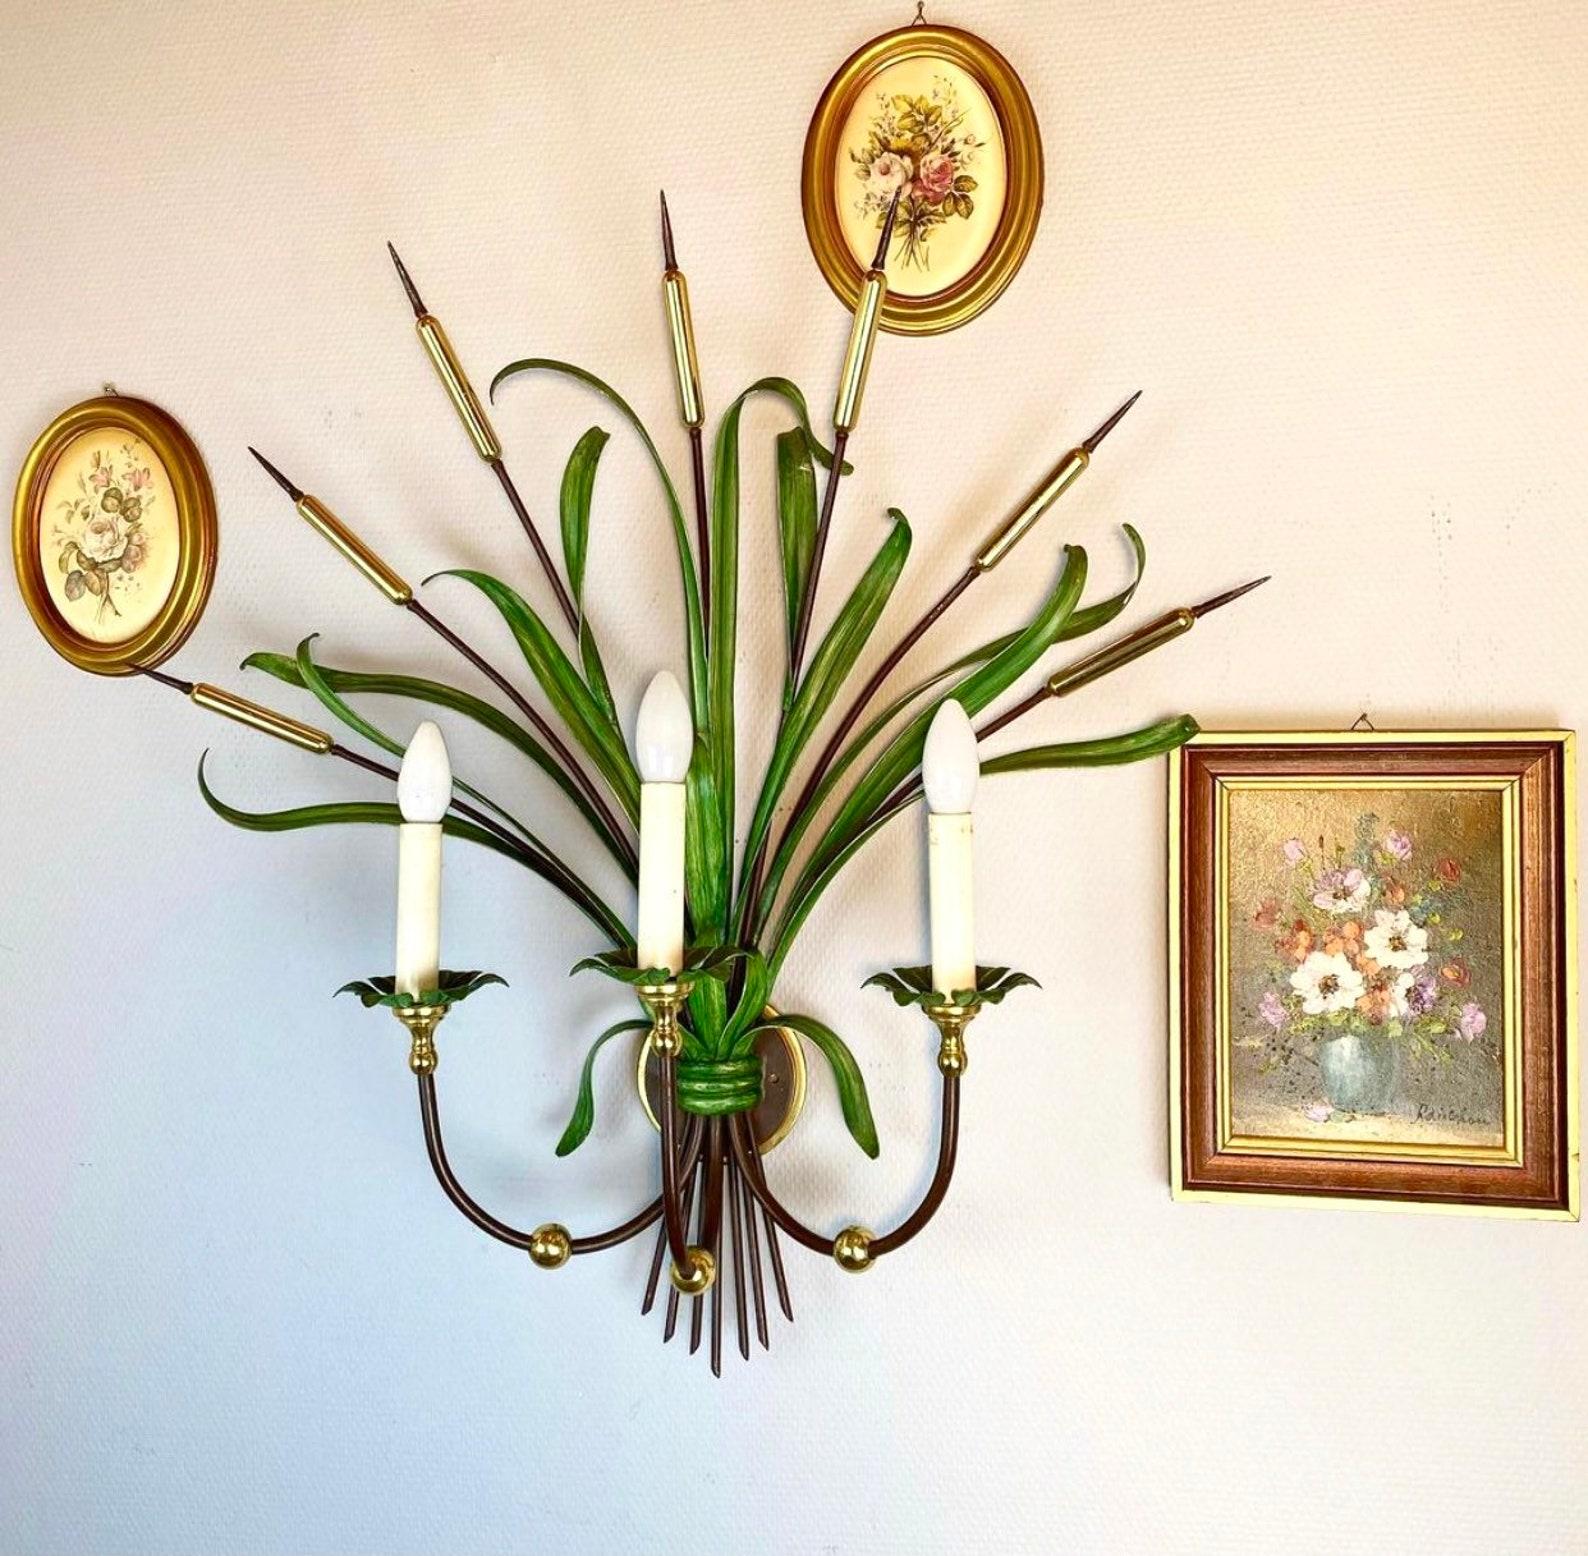 Vintage sconce reeds large green sconce reeds vintage lighting in reeds form massive sconce in nature style Belgium vintage lighting

Large green wall sculpture - sconce “Reeds”.

Add an elegant accent to your interior living spaces with this